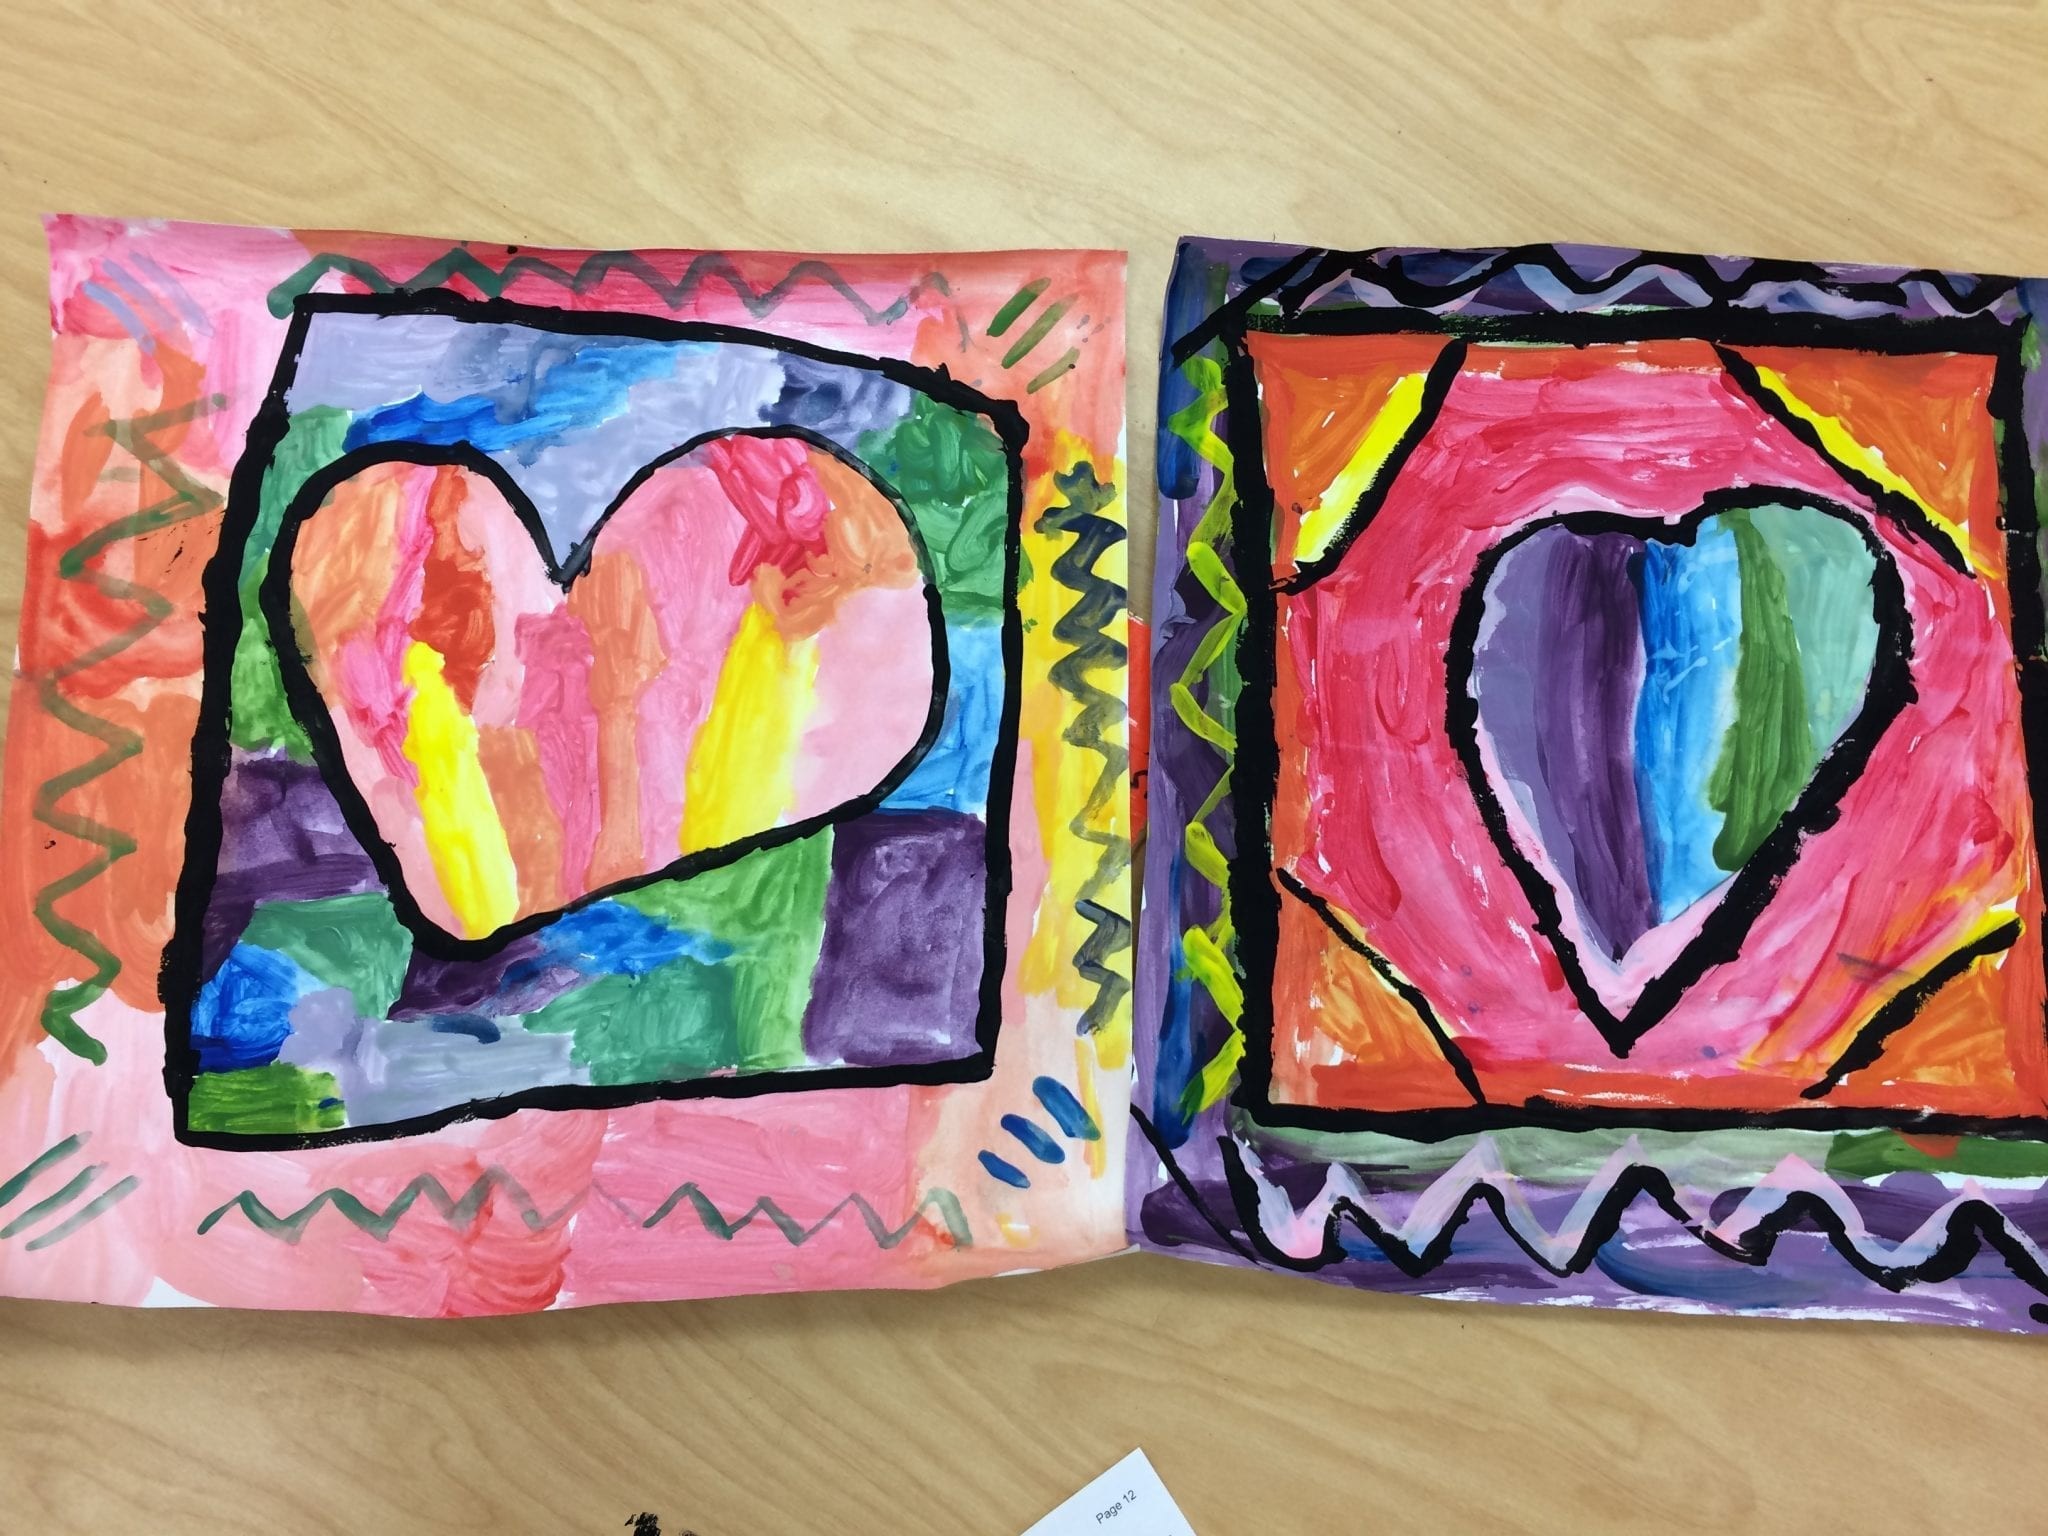 2048x1536 We created our own versions of Peter Max's painted hearts using warm and  cool colors in time for Valentine's Day.